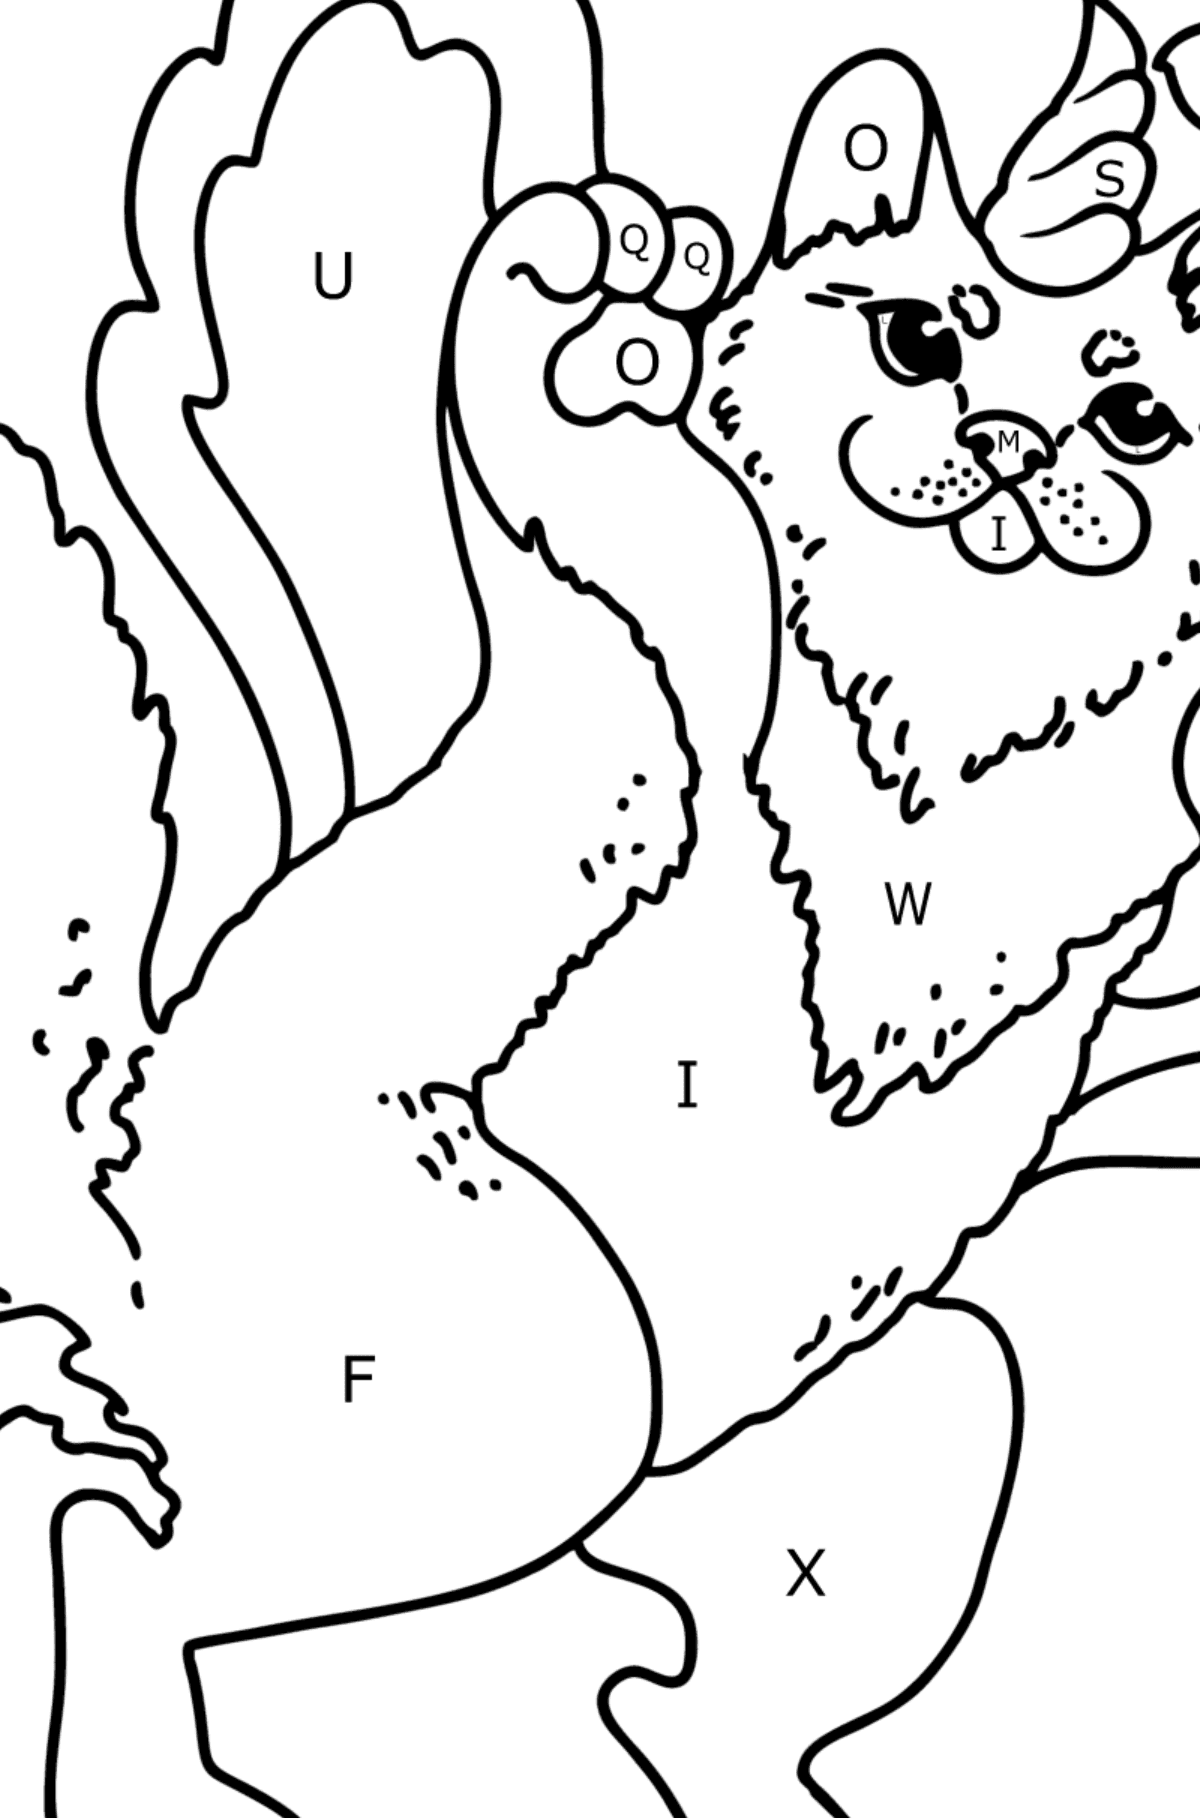 Cat Unicorn coloring page - Coloring by Letters for Kids